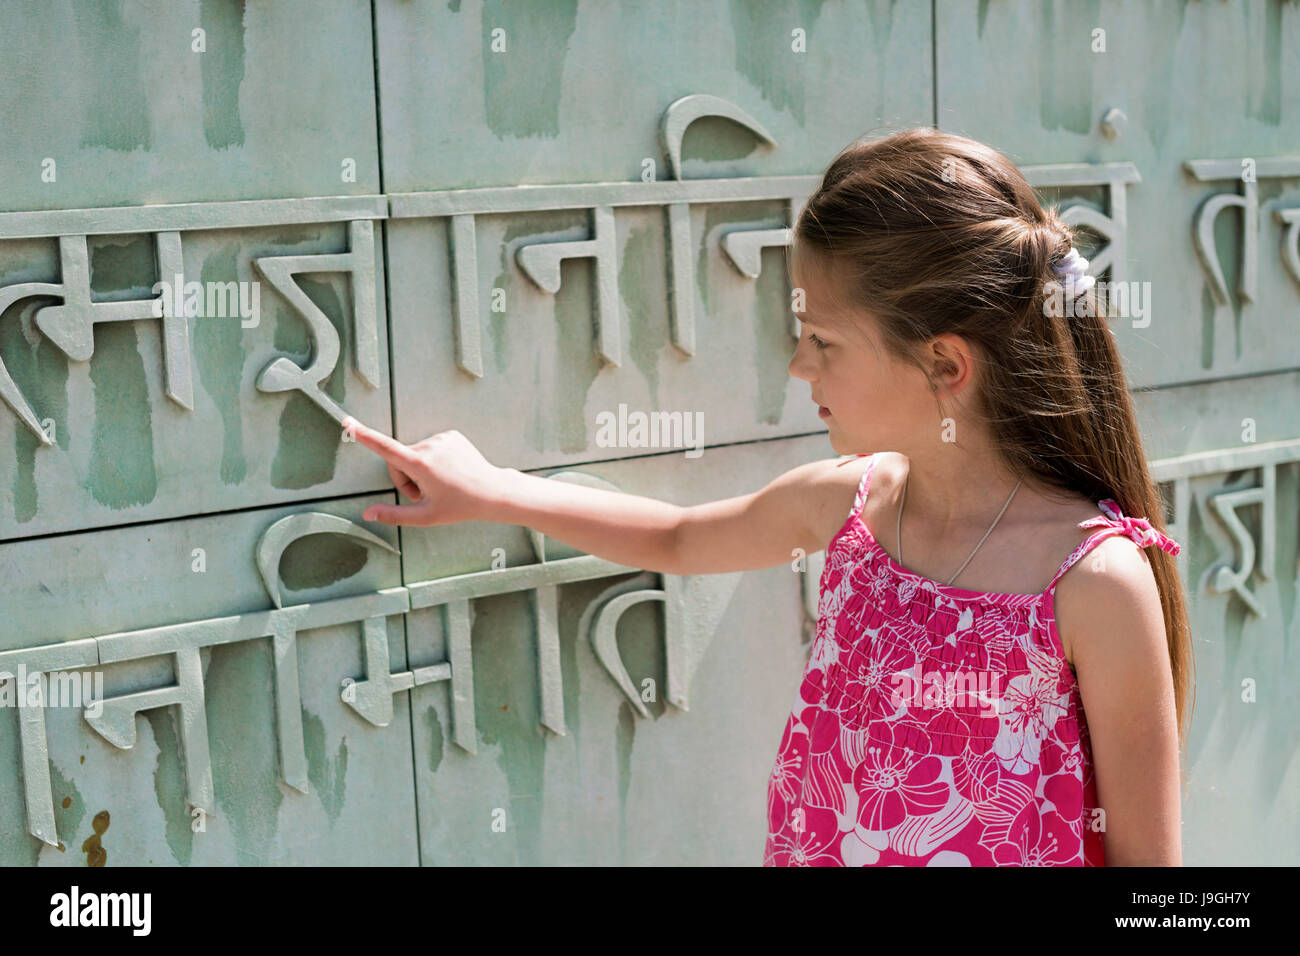 child girl trying to read unknown language letters relief on building wall Stock Photo